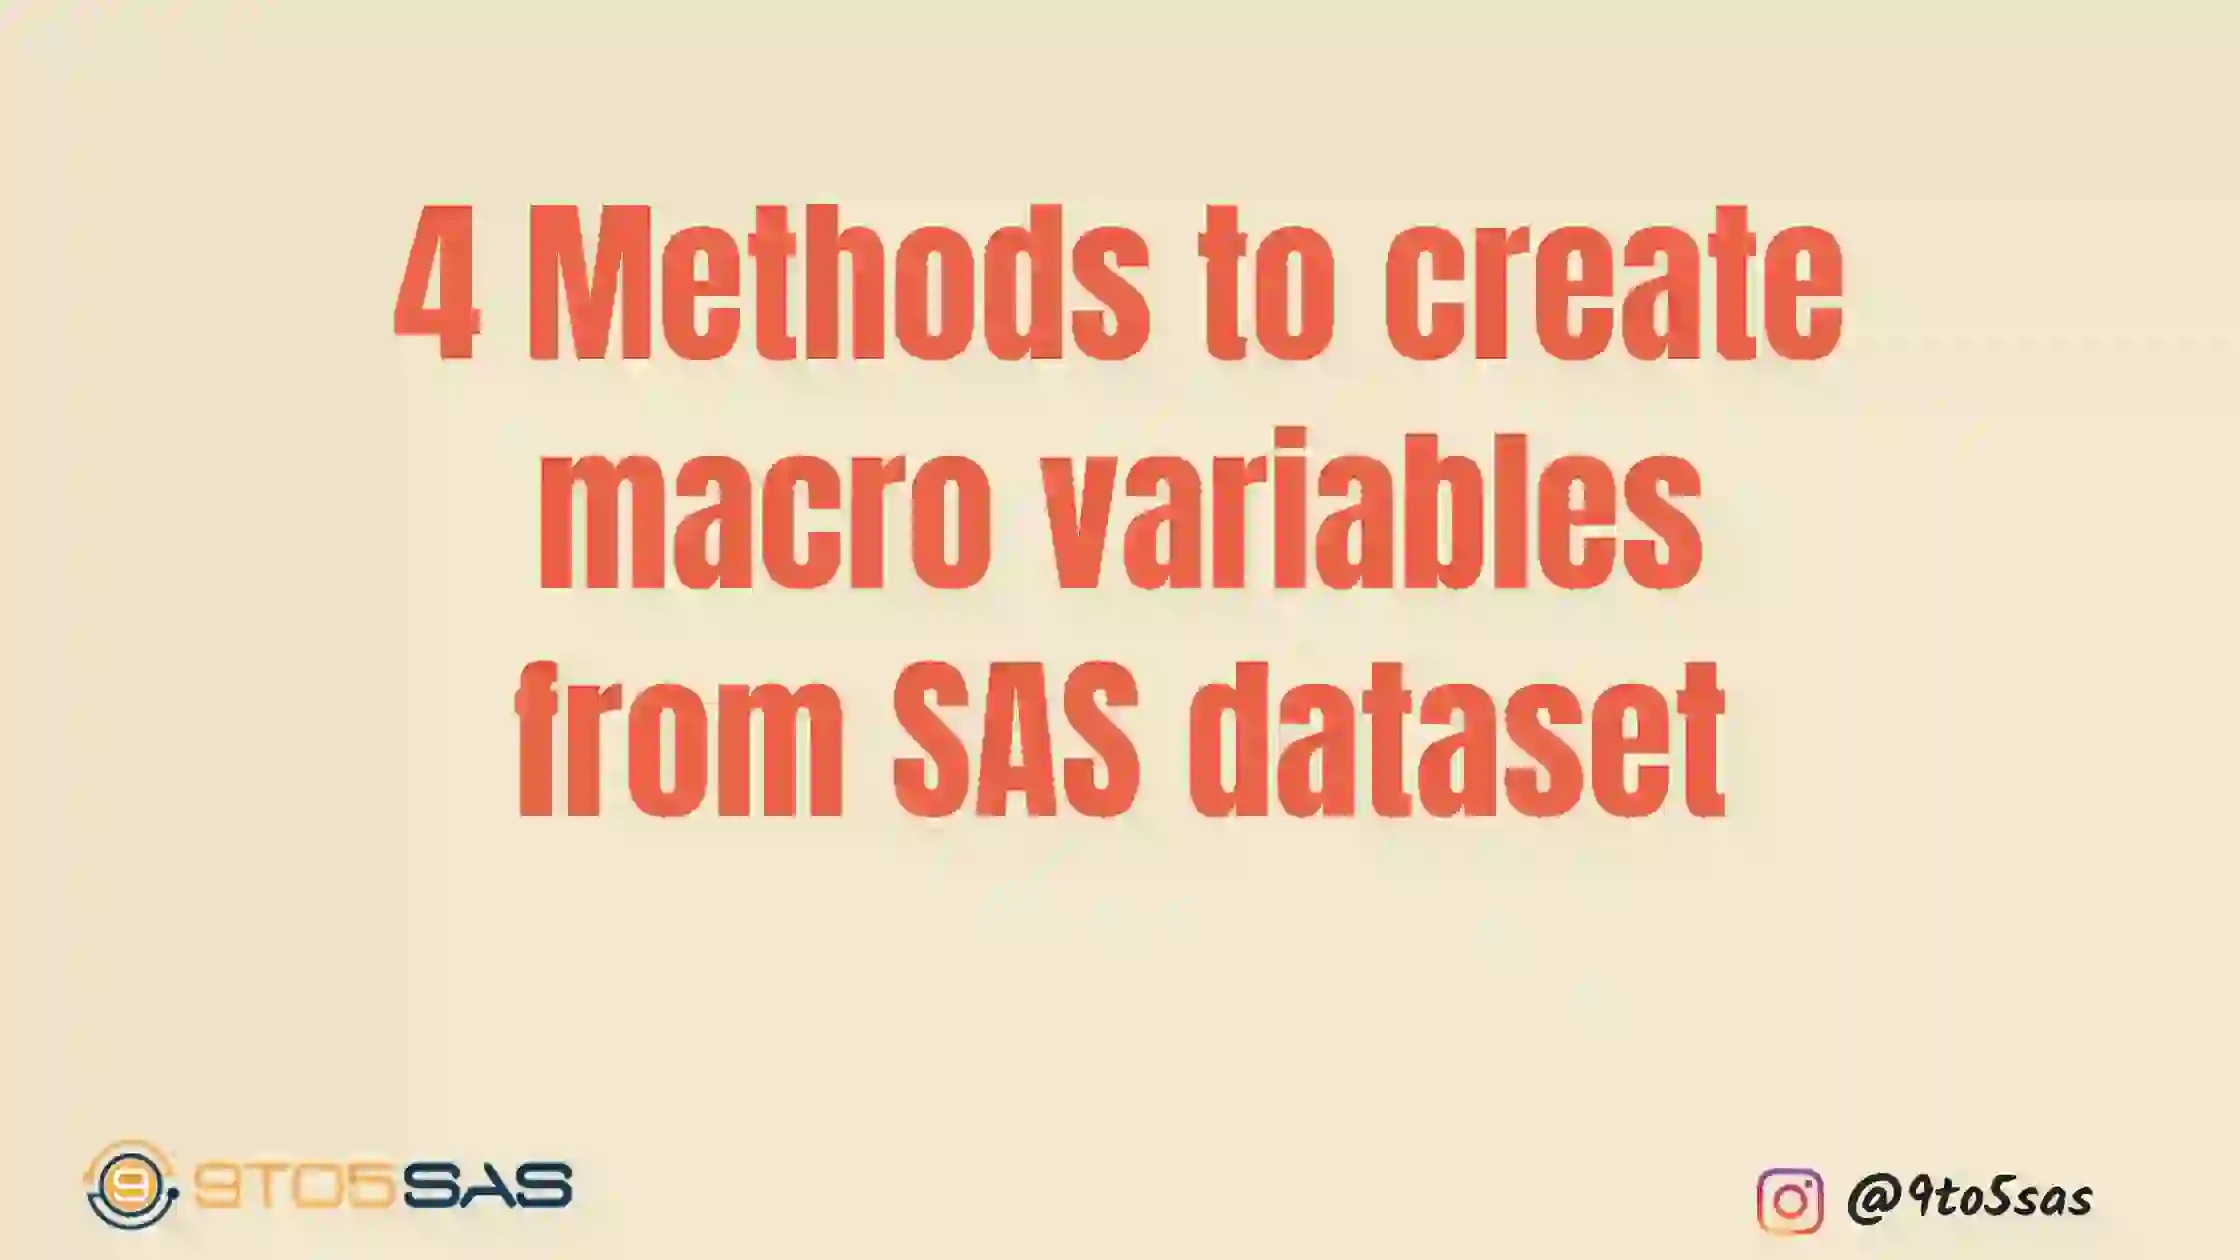 How many ways we can create macro variables in SAS?